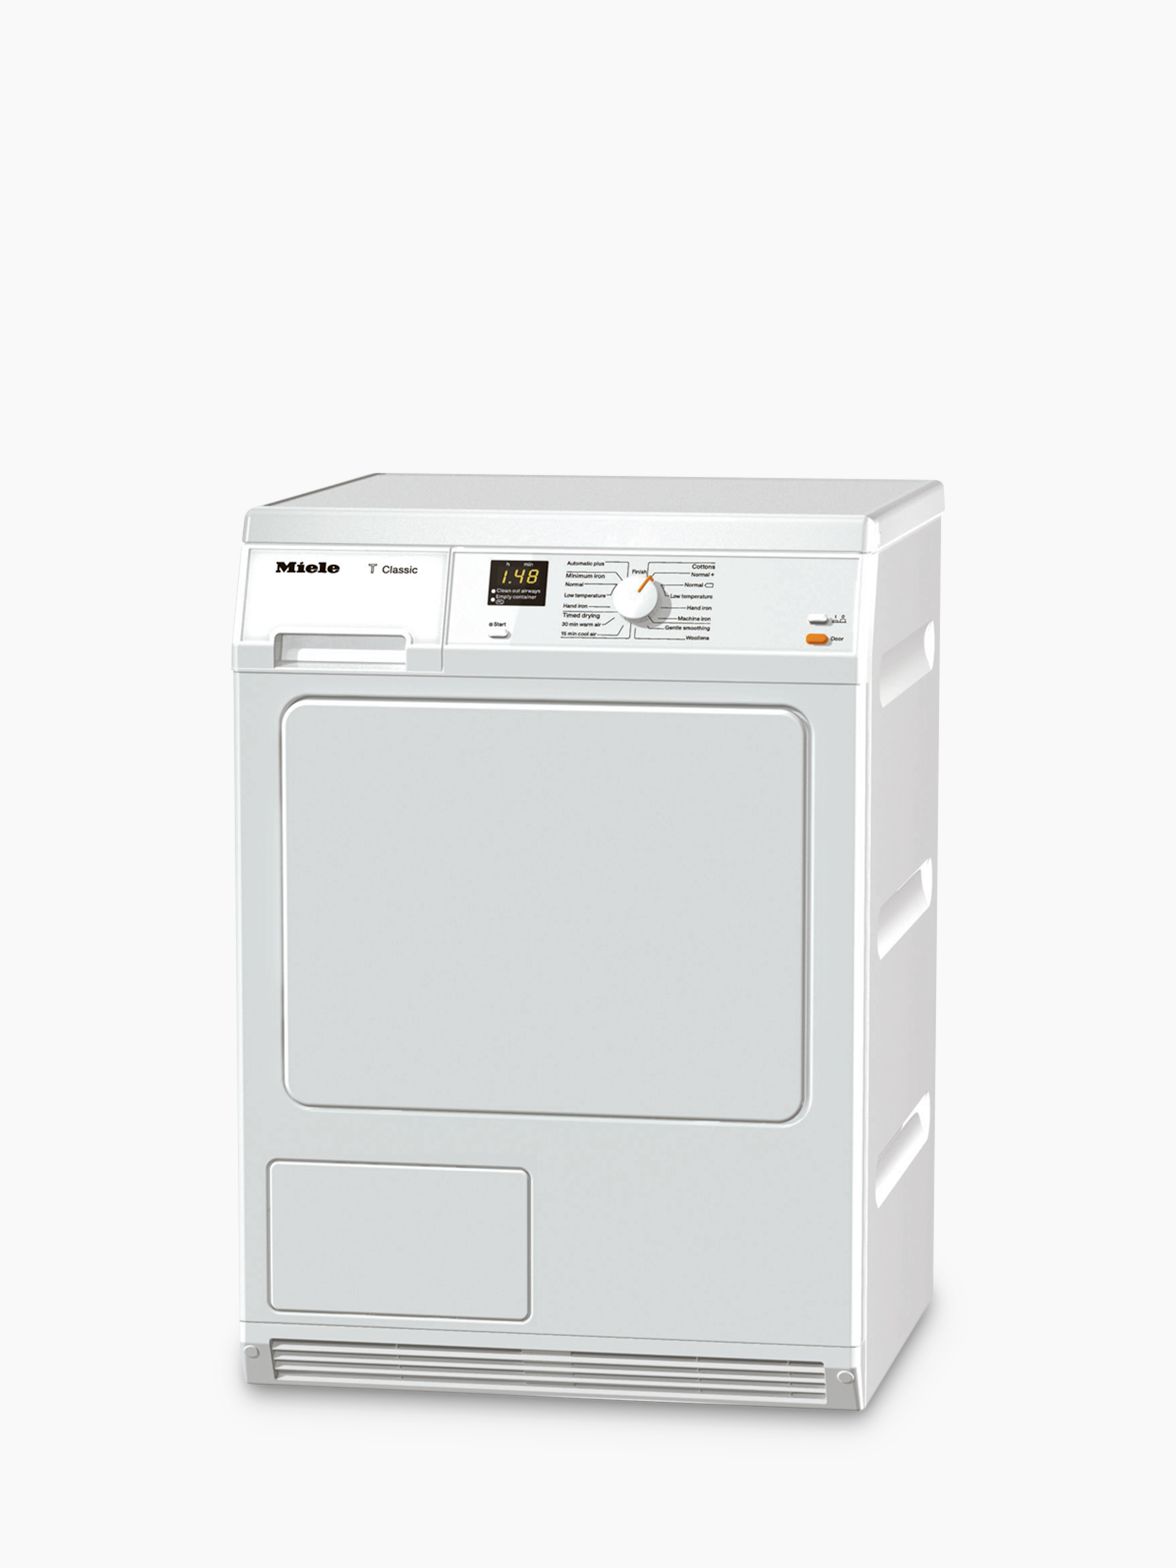 Miele TDA150C Condenser Freestanding Tumble Dryer, 7kg Load, B Energy Rating, White